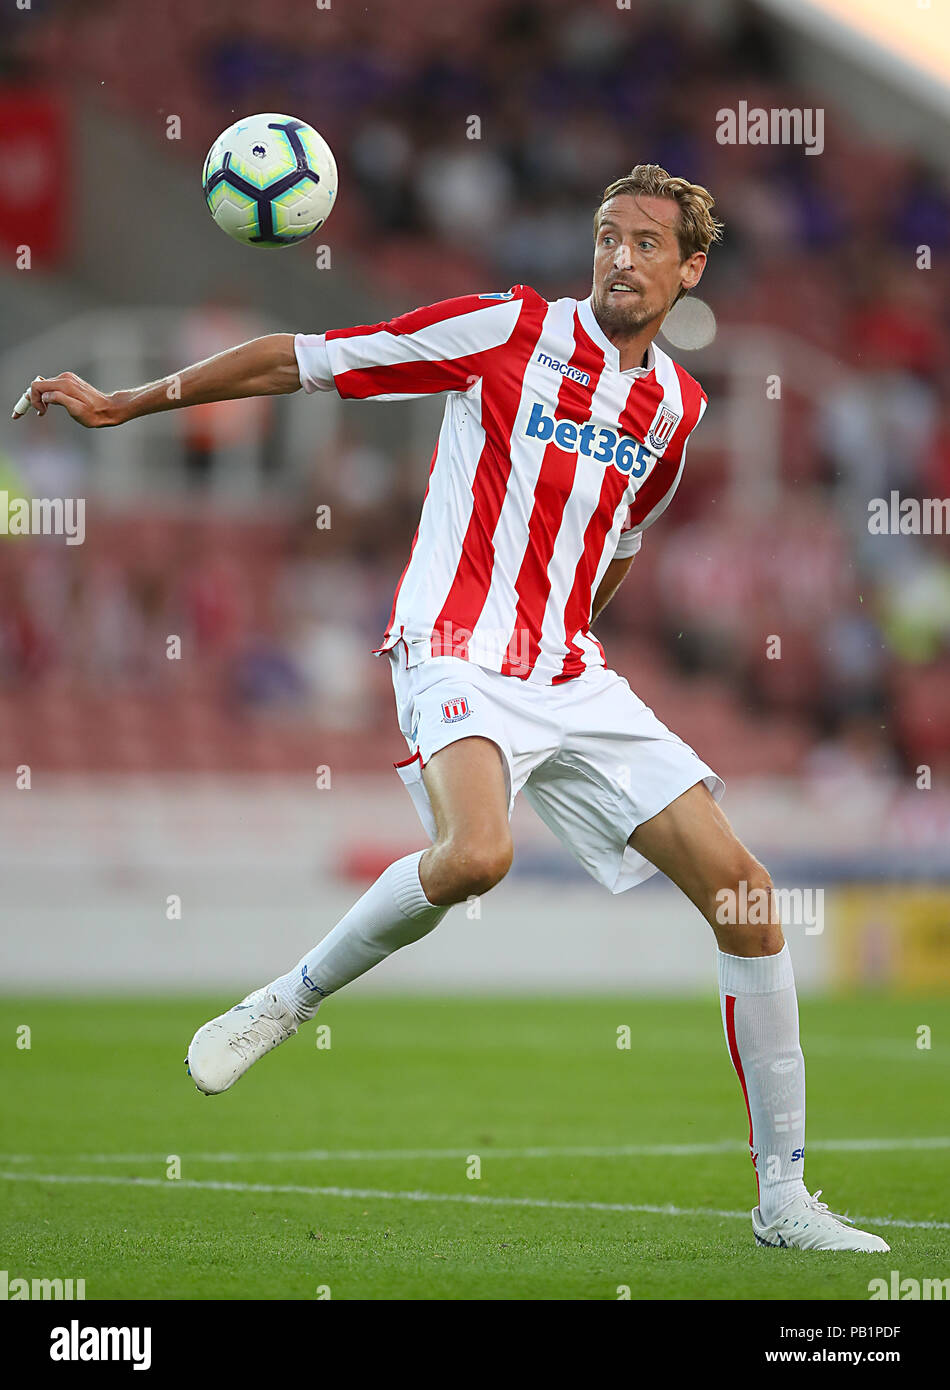 Stoke City's Peter Crouch during a pre season friendly match at The Bet365 Stadium, Stoke. PRESS ASSOCIATION Photo. Picture date: Wednesday July 25, 2018. Photo credit should read: Nick Potts/PA Wire. No use with unauthorised audio, video, data, fixture lists, club/league logos or 'live' services. Online in-match use limited to 75 images, no video emulation. No use in betting, games or single club/league/player publications. Stock Photo